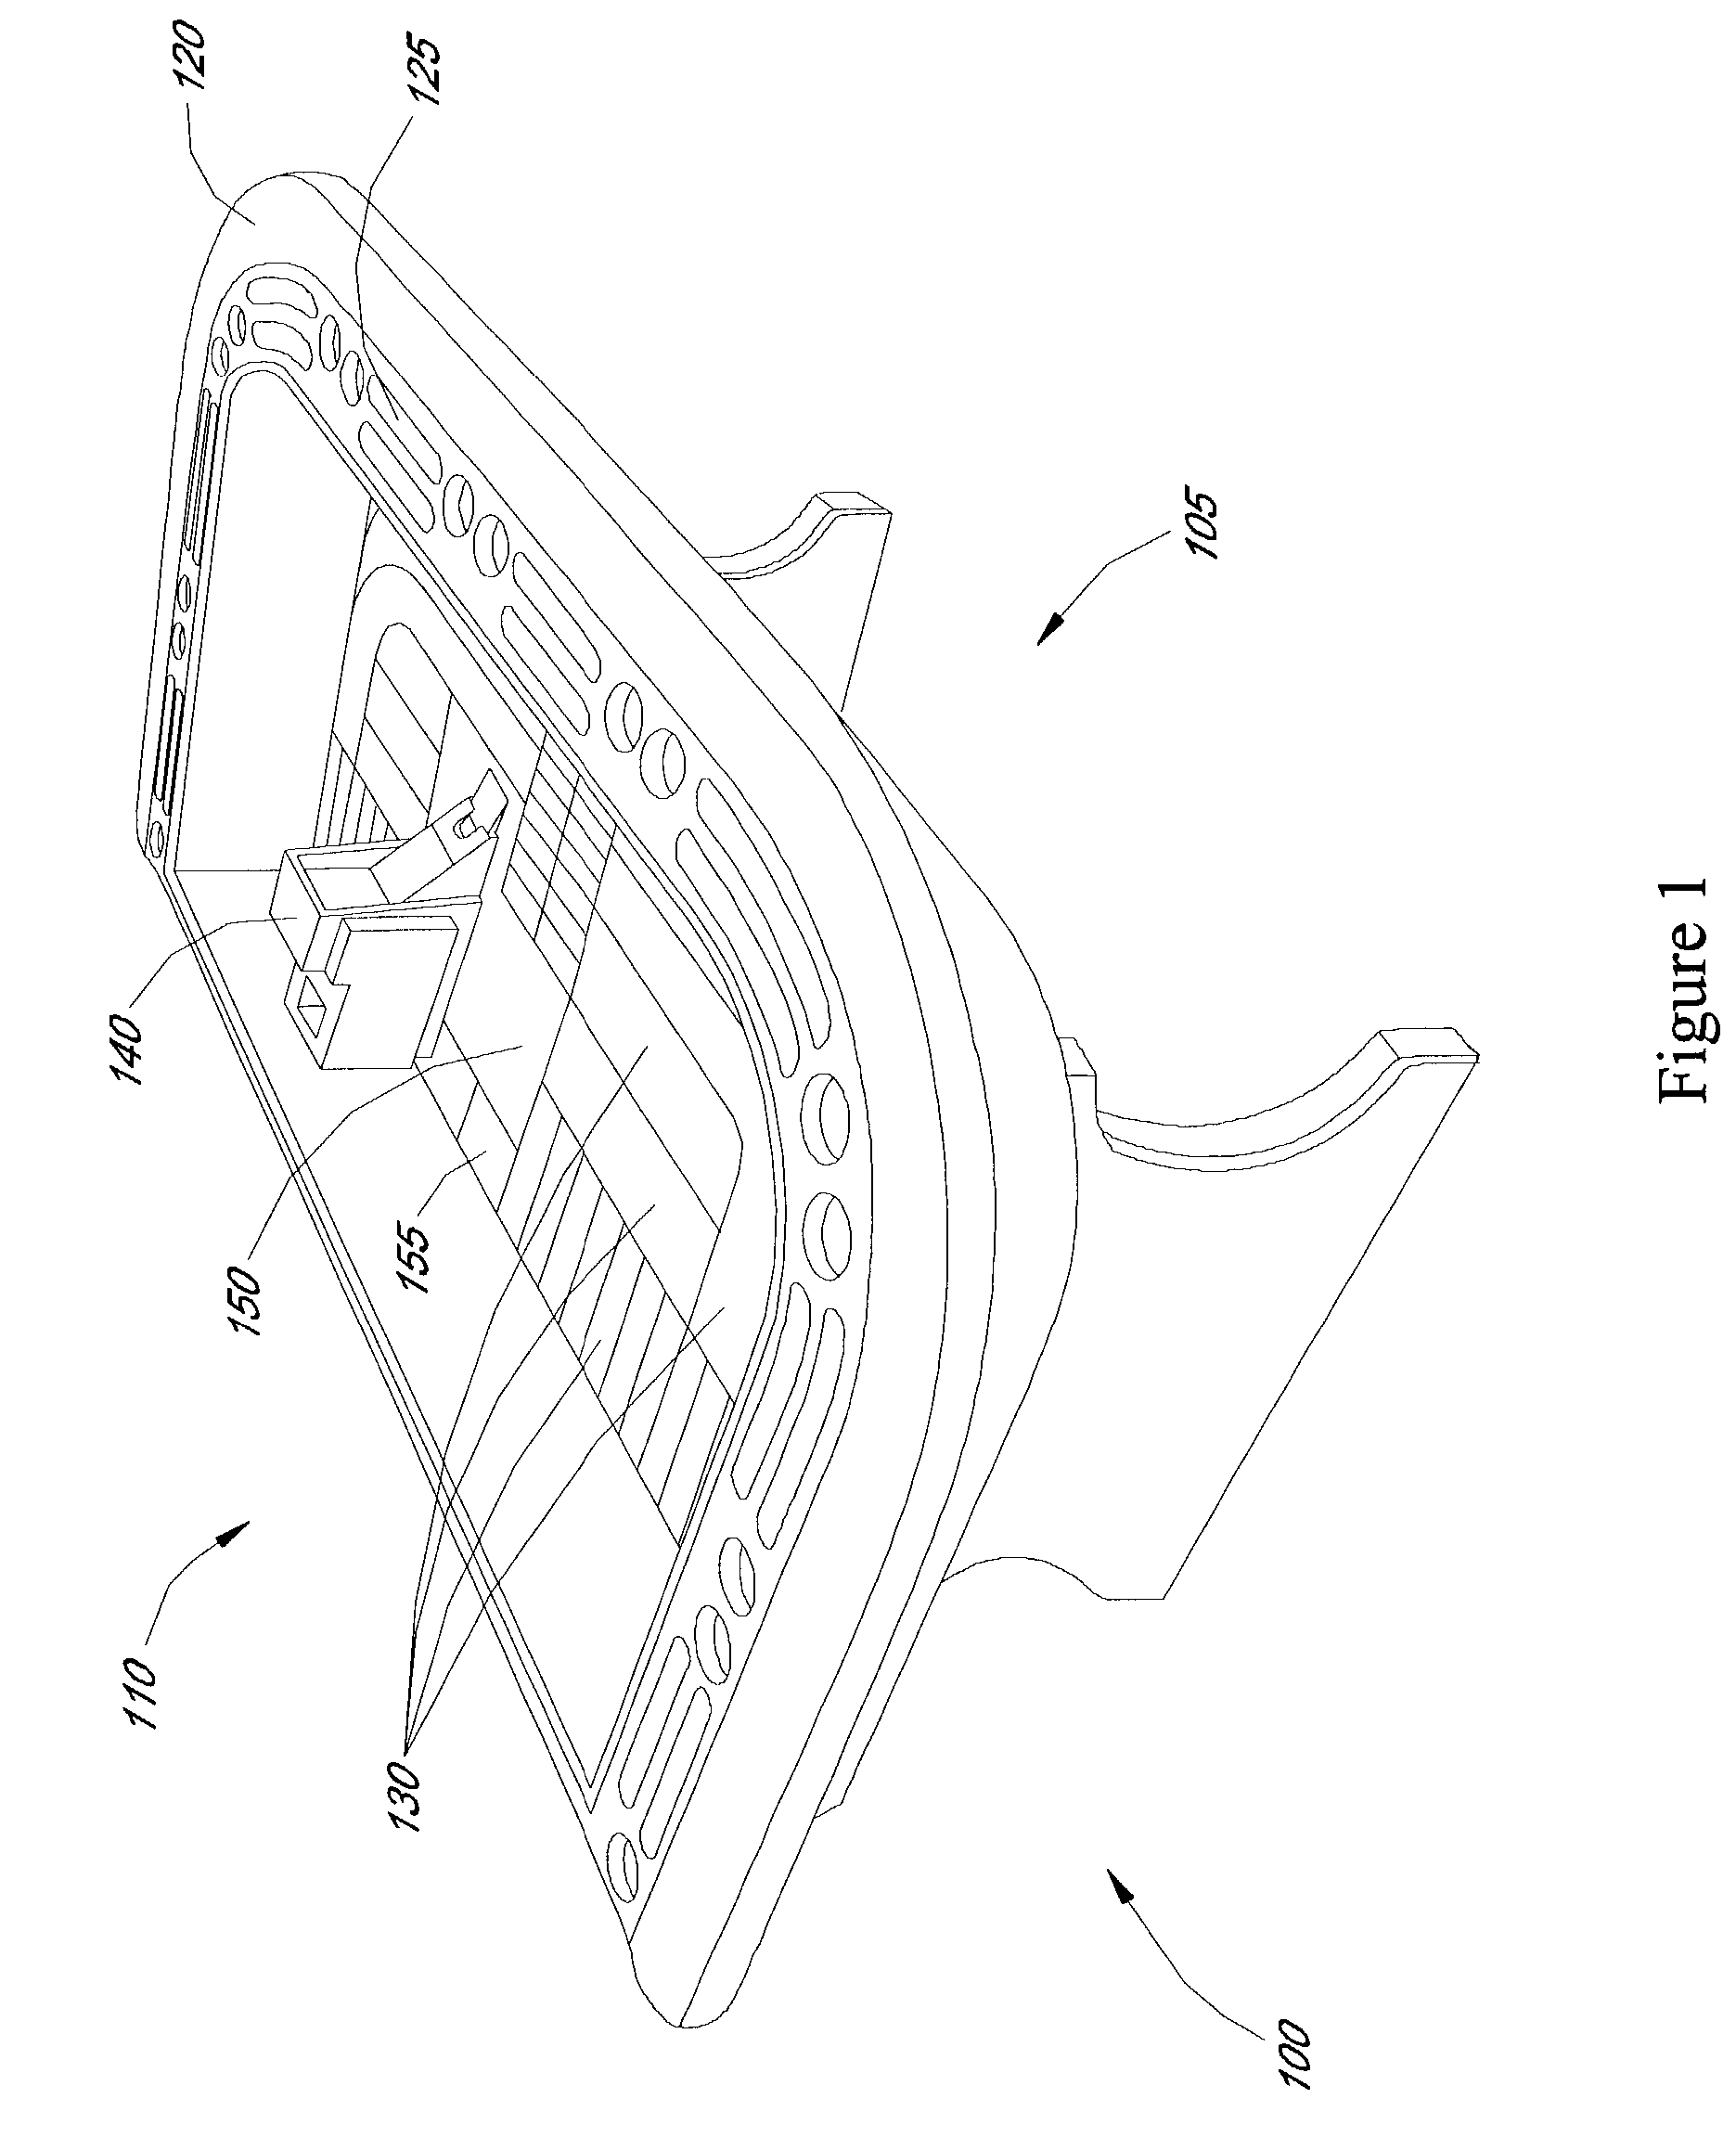 Method and apparatus for simulating games of chance with the use of a set of cards, including a wildcard, to replace use of dice